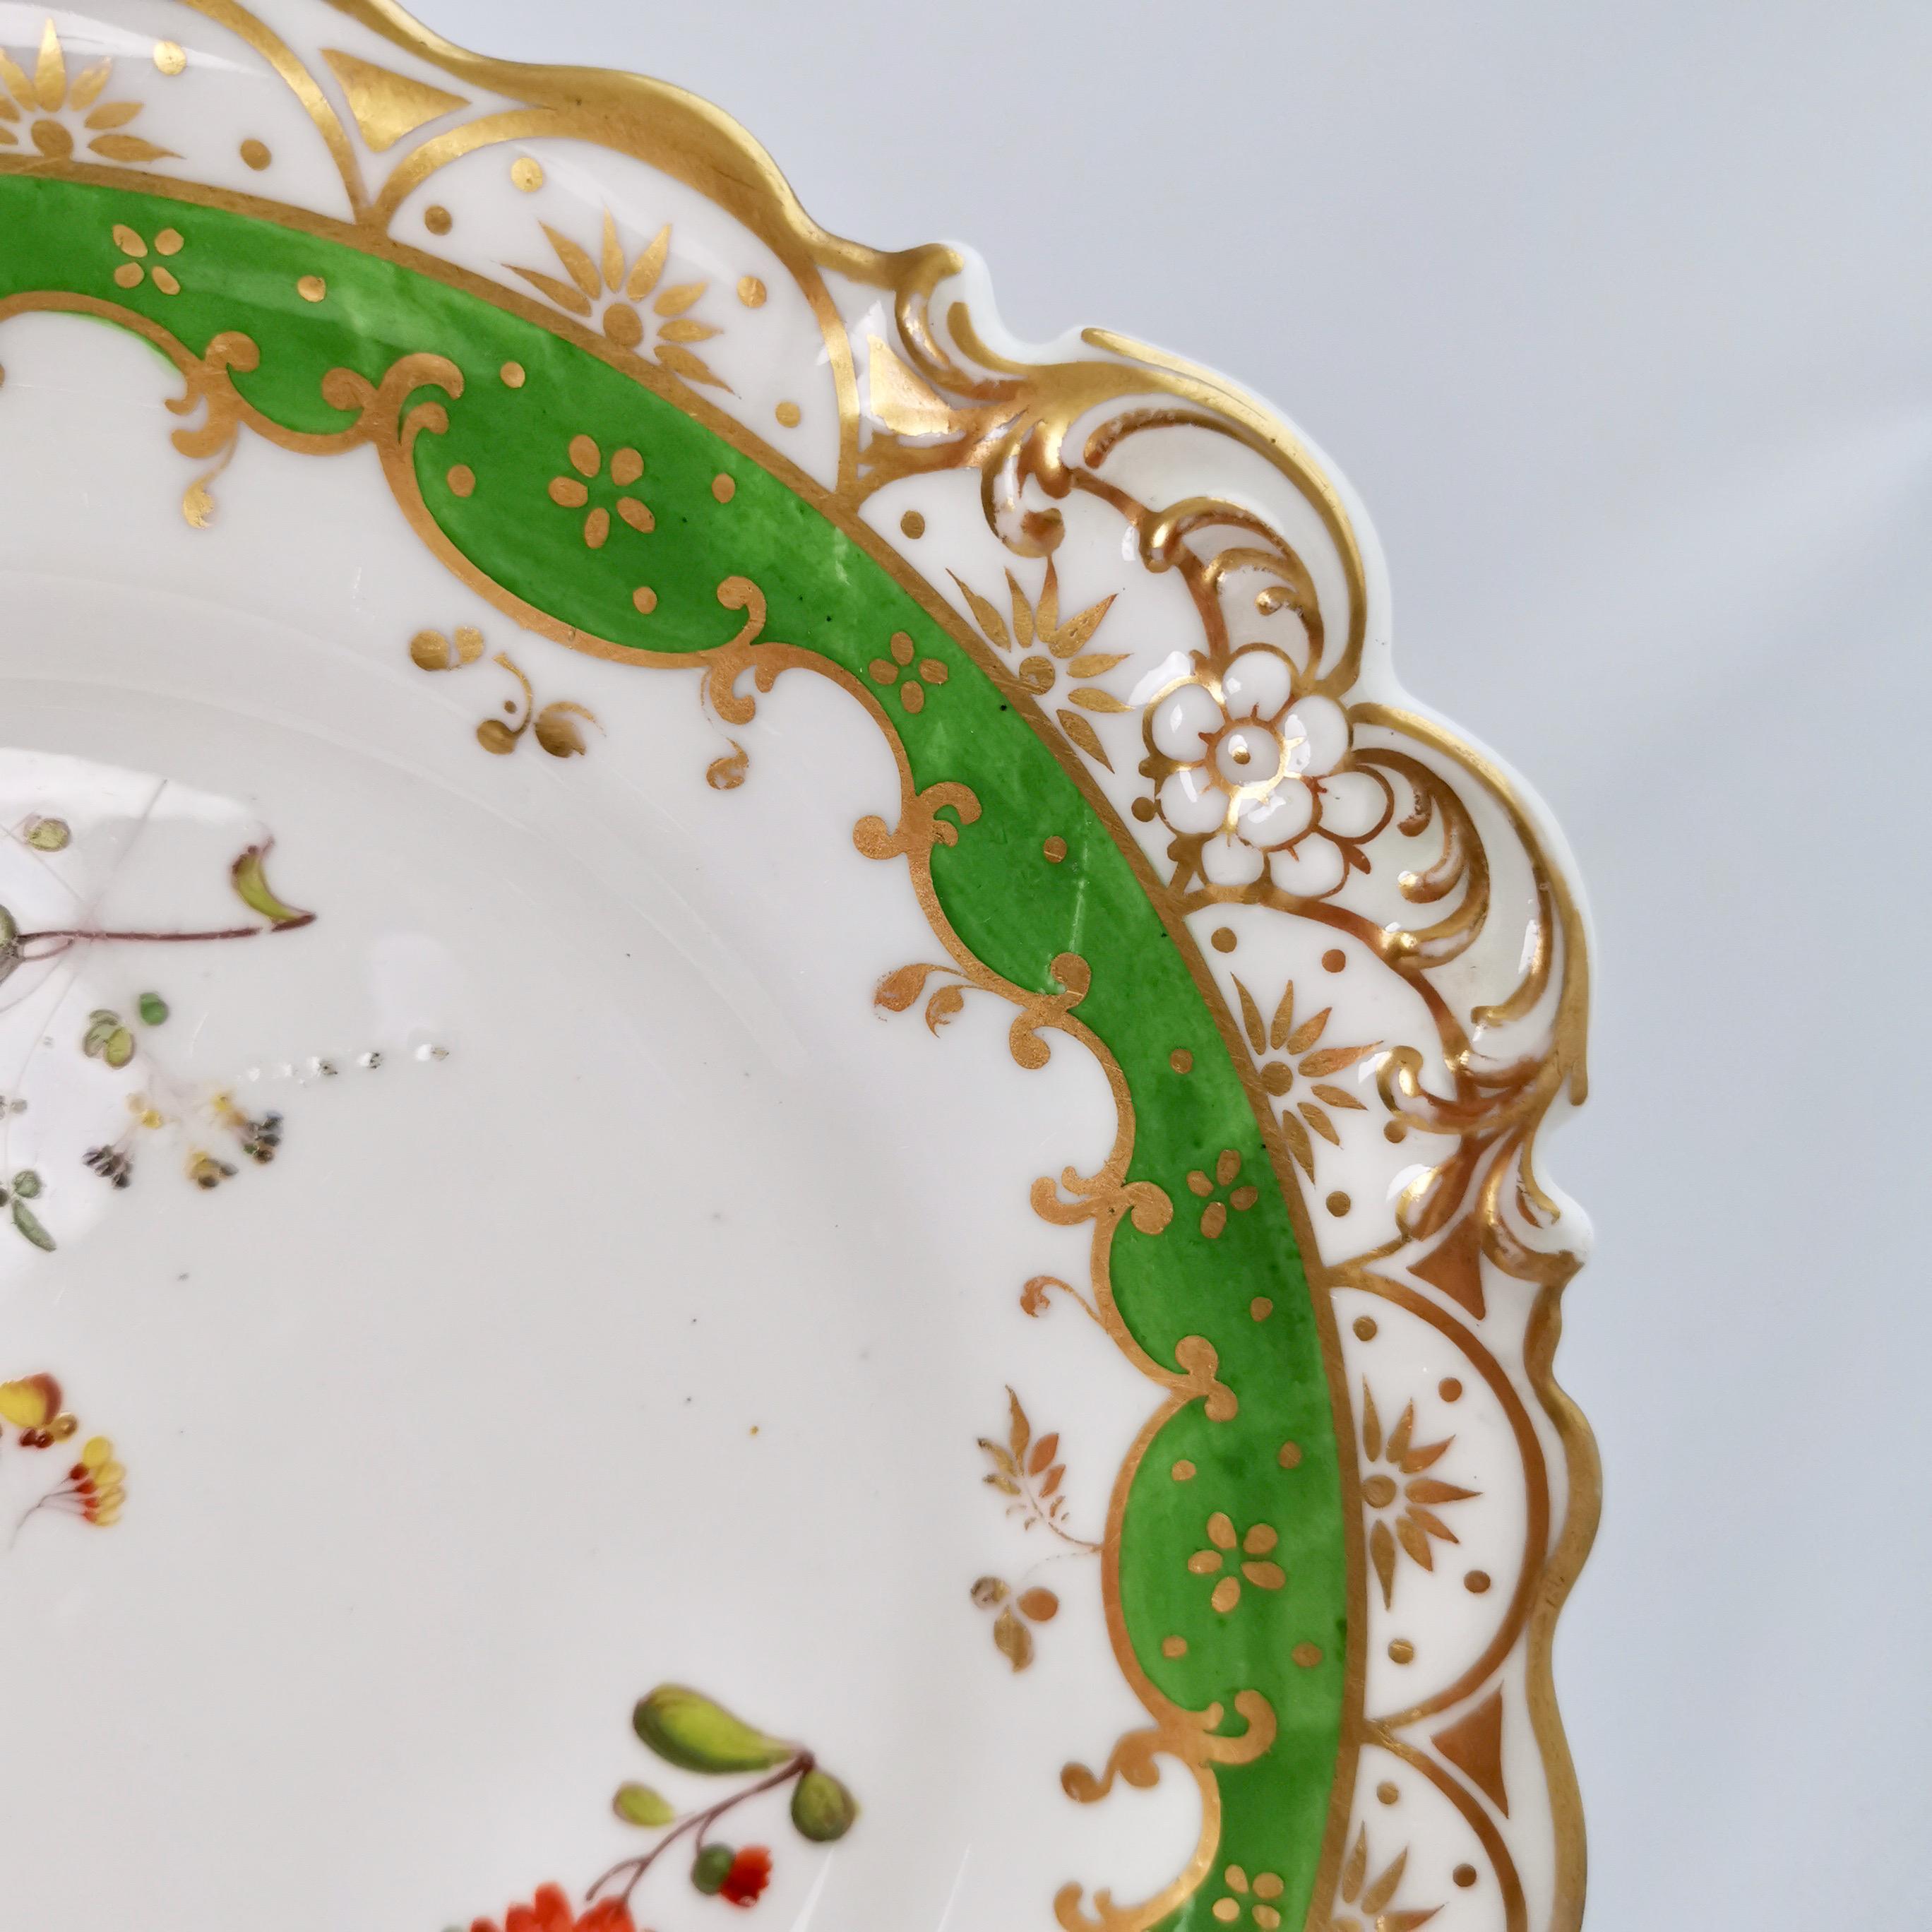 English Ridgway Porcelain Plate, Green with Hand Painted Flowers, ca 1832